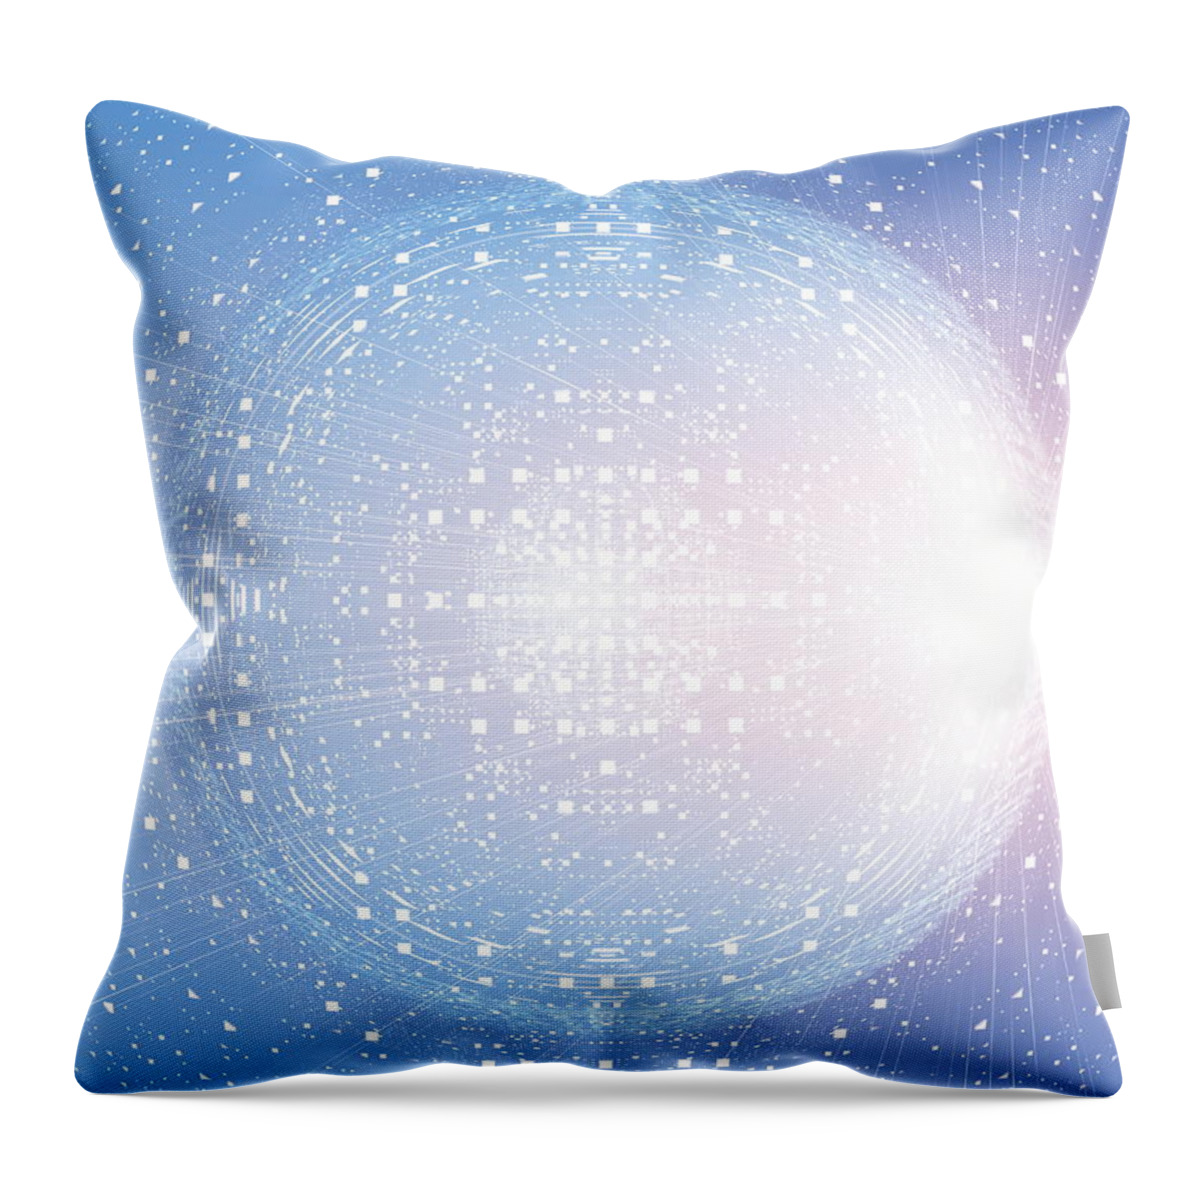 Ball Throw Pillow featuring the digital art Image Of Space, Computer Graphic #1 by Yoshiyuki Fukui/amanaimagesrf